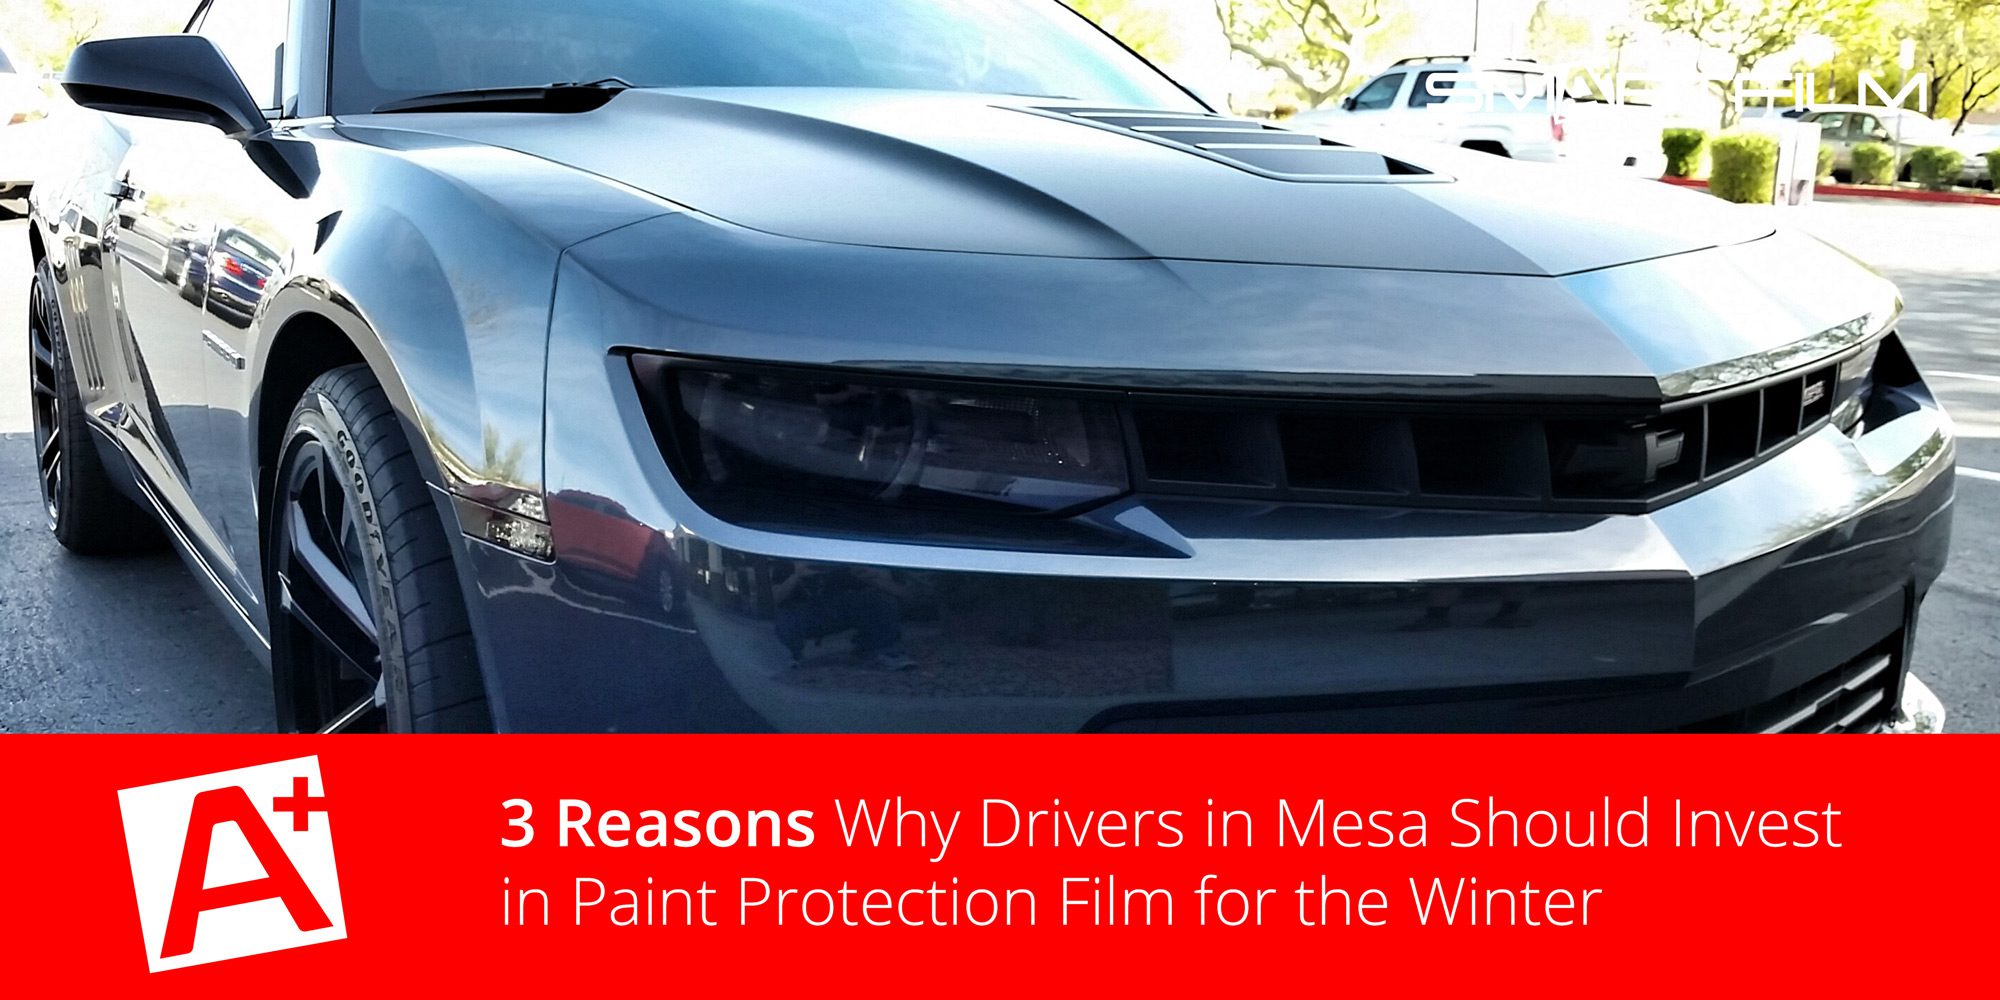 Paint Protection Film in Mesa